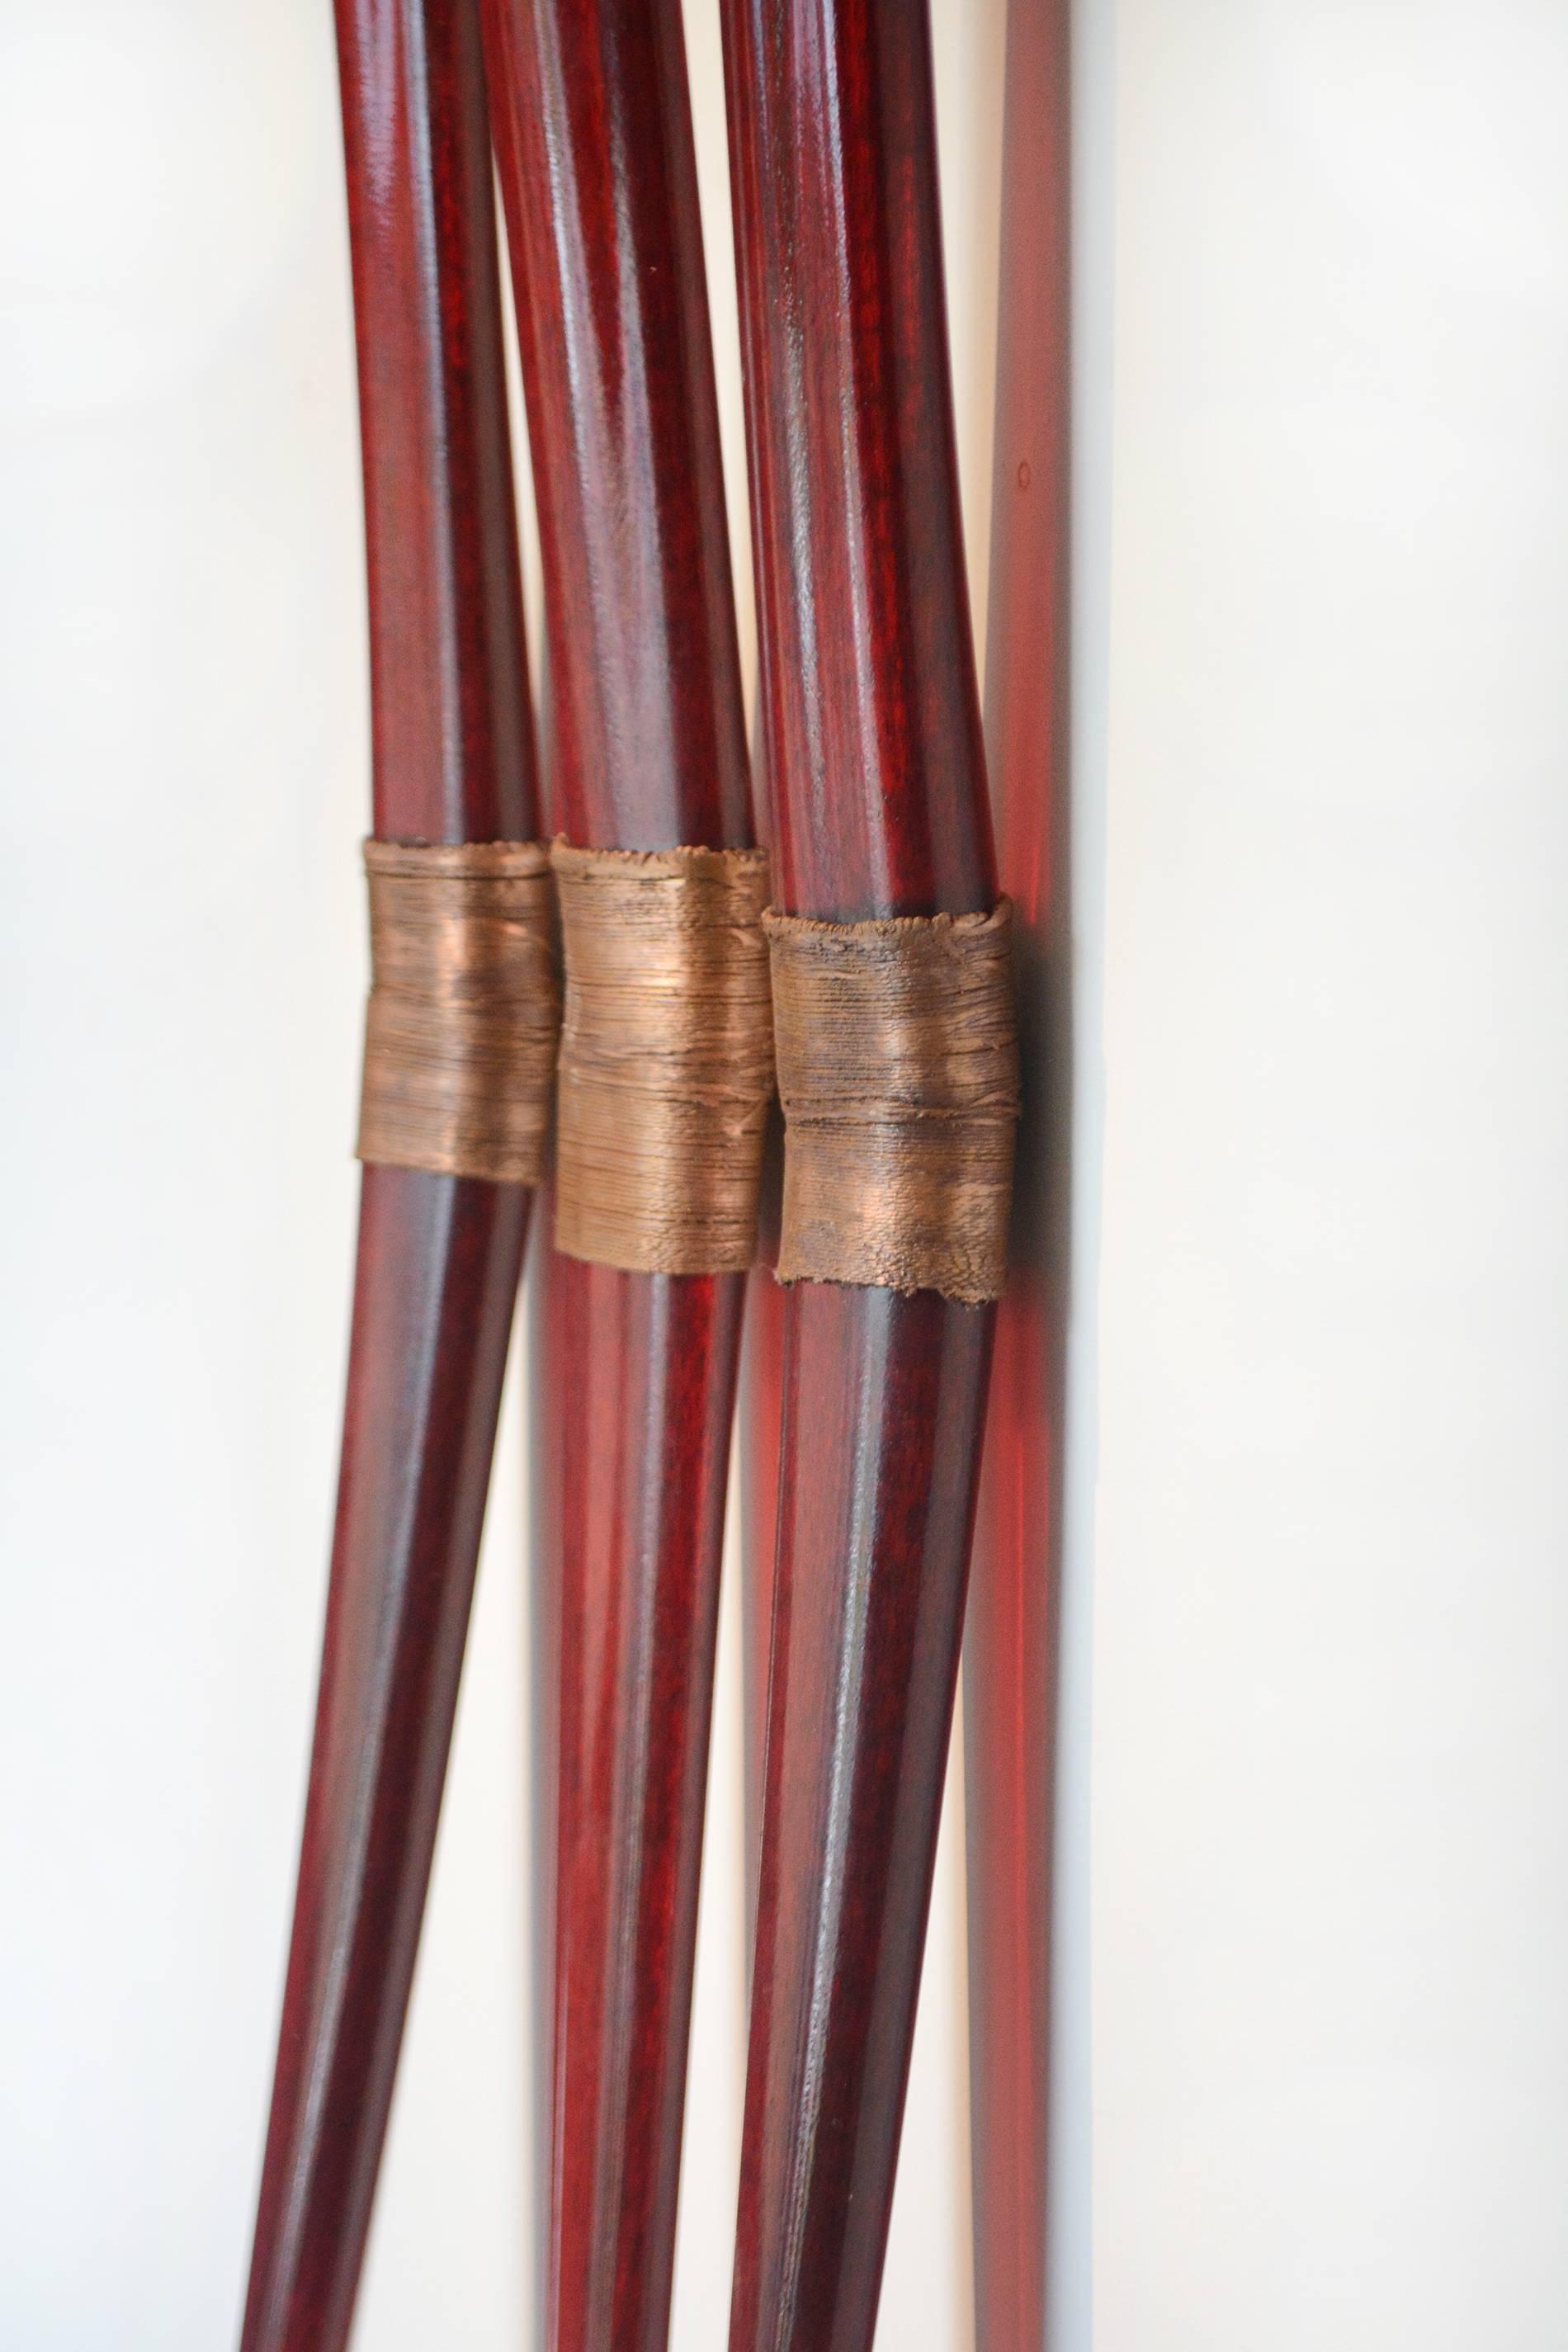 Flames - red, glass, copper, translucent, abstract wall sculpture - Contemporary Sculpture by John Paul Robinson